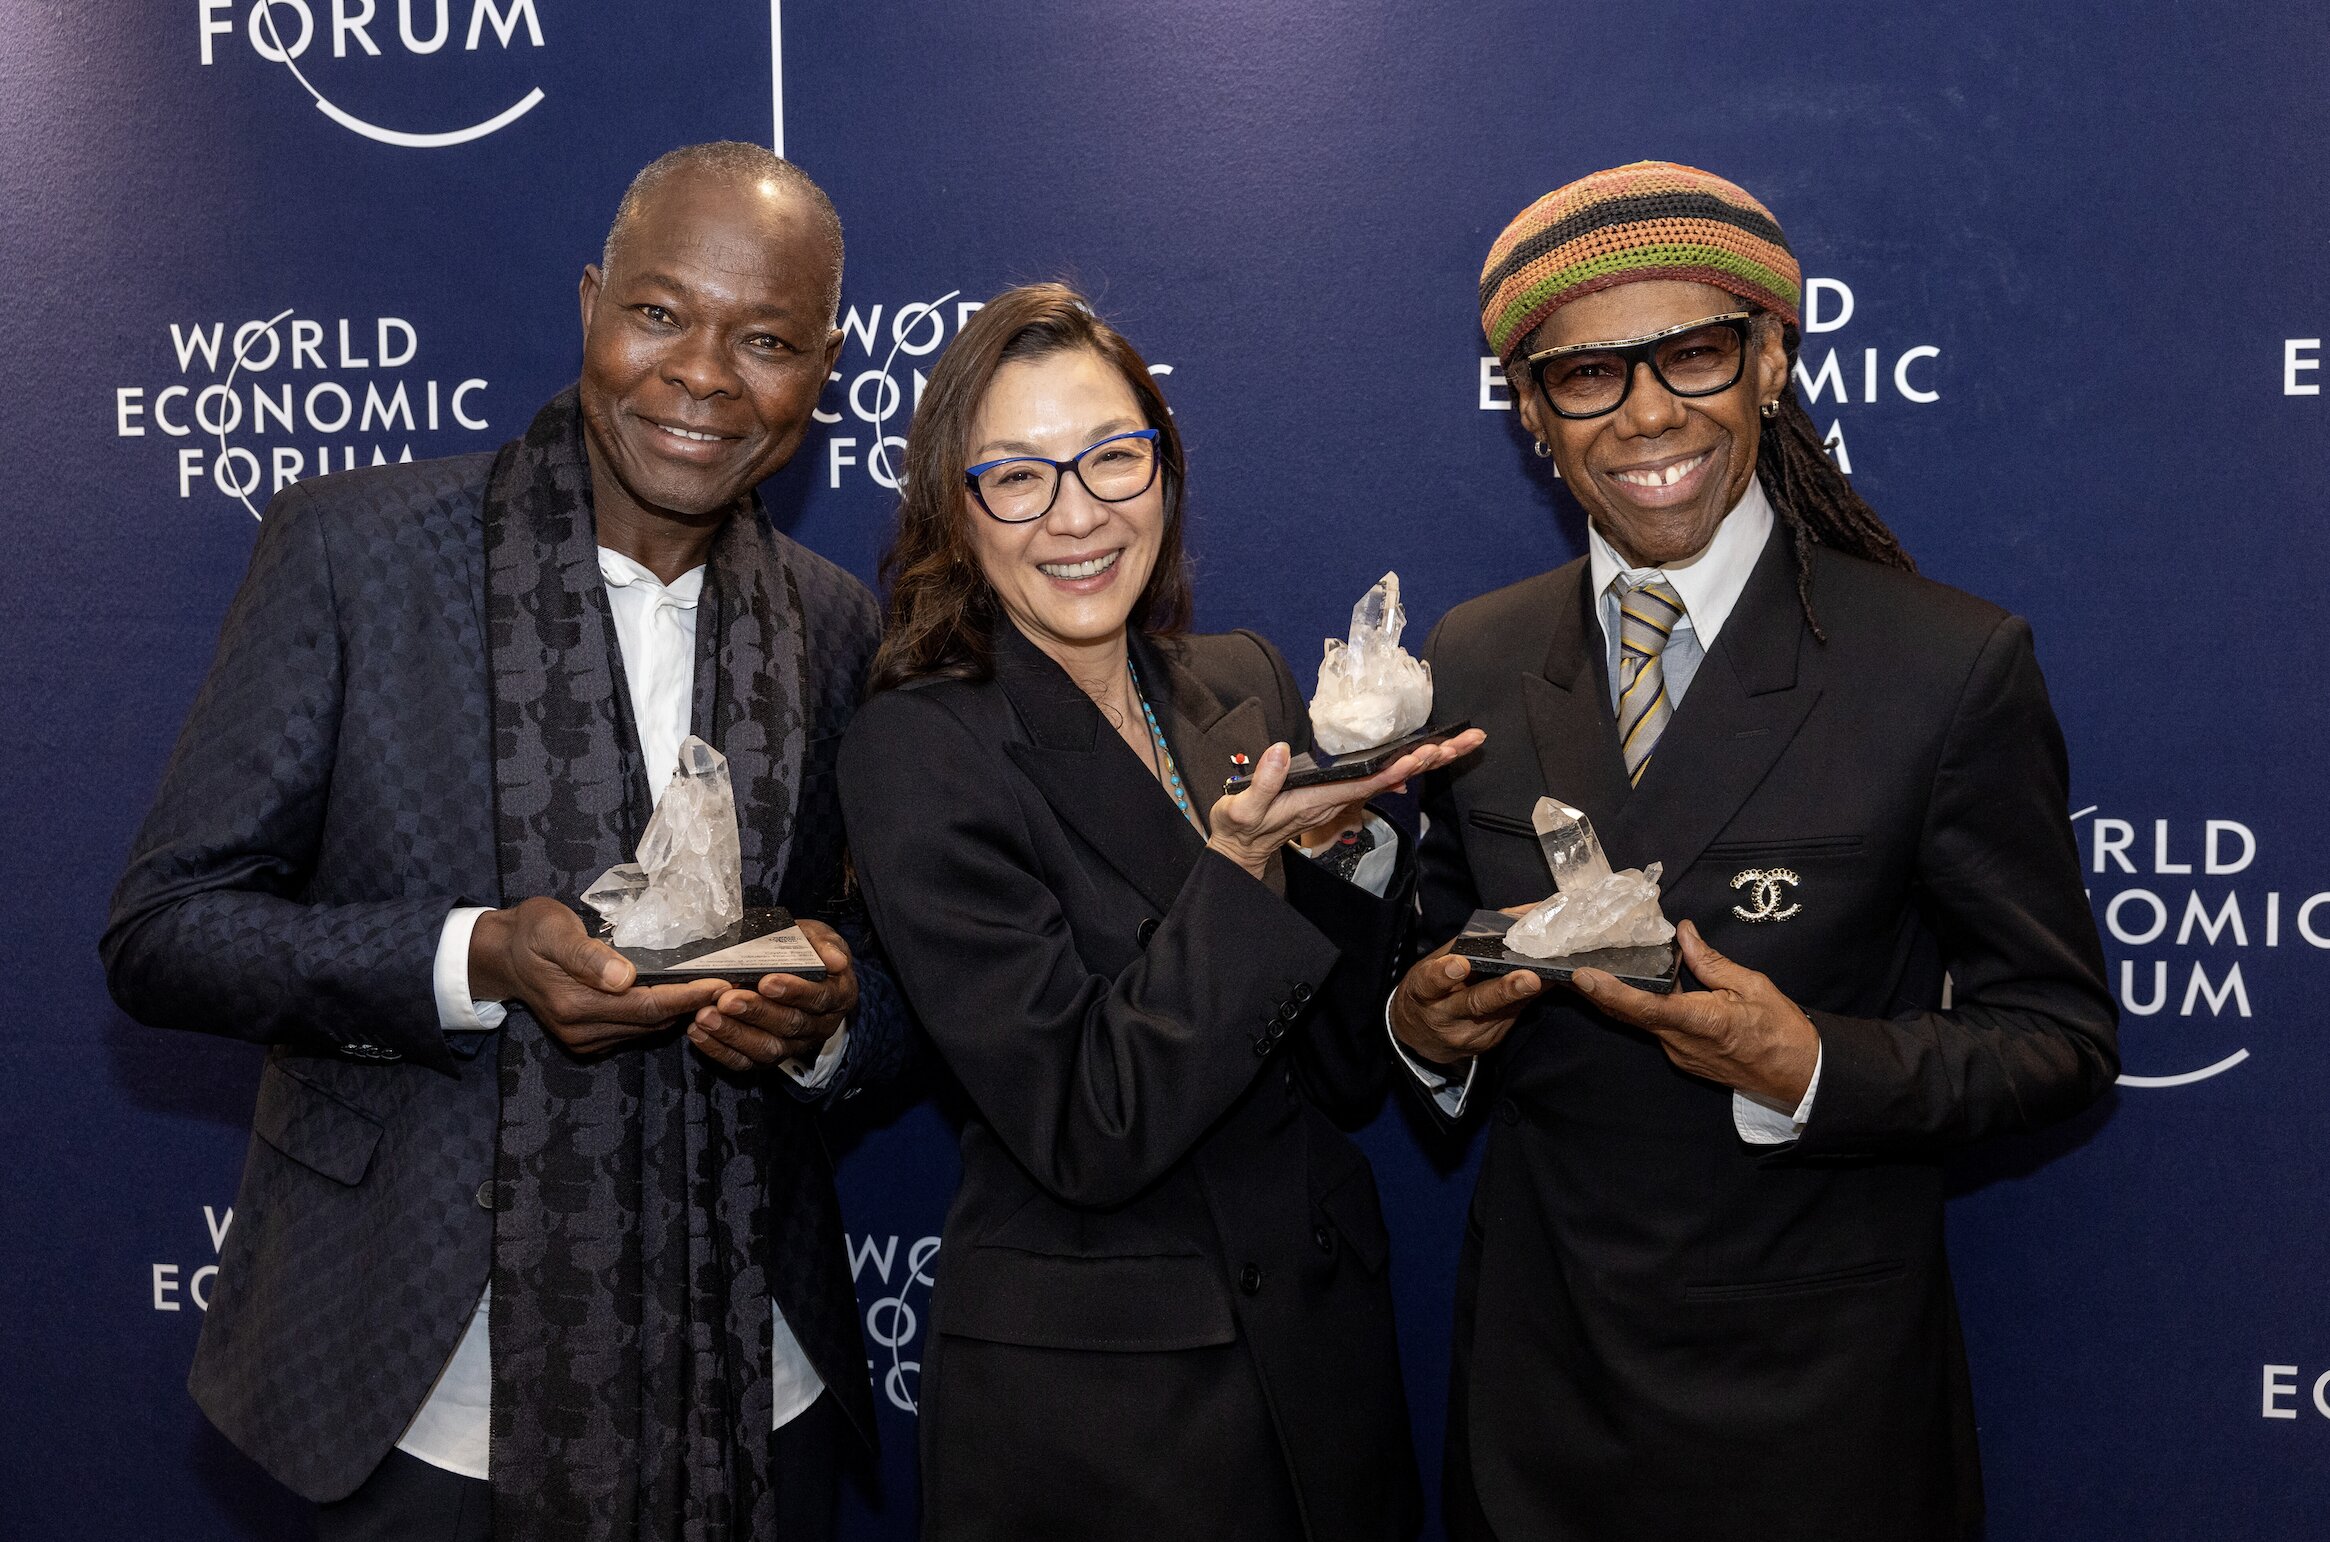 L-R: Francis Kéré, Michelle Yeoh, and Nile Rodgers receive their Crystal Awards on January 15